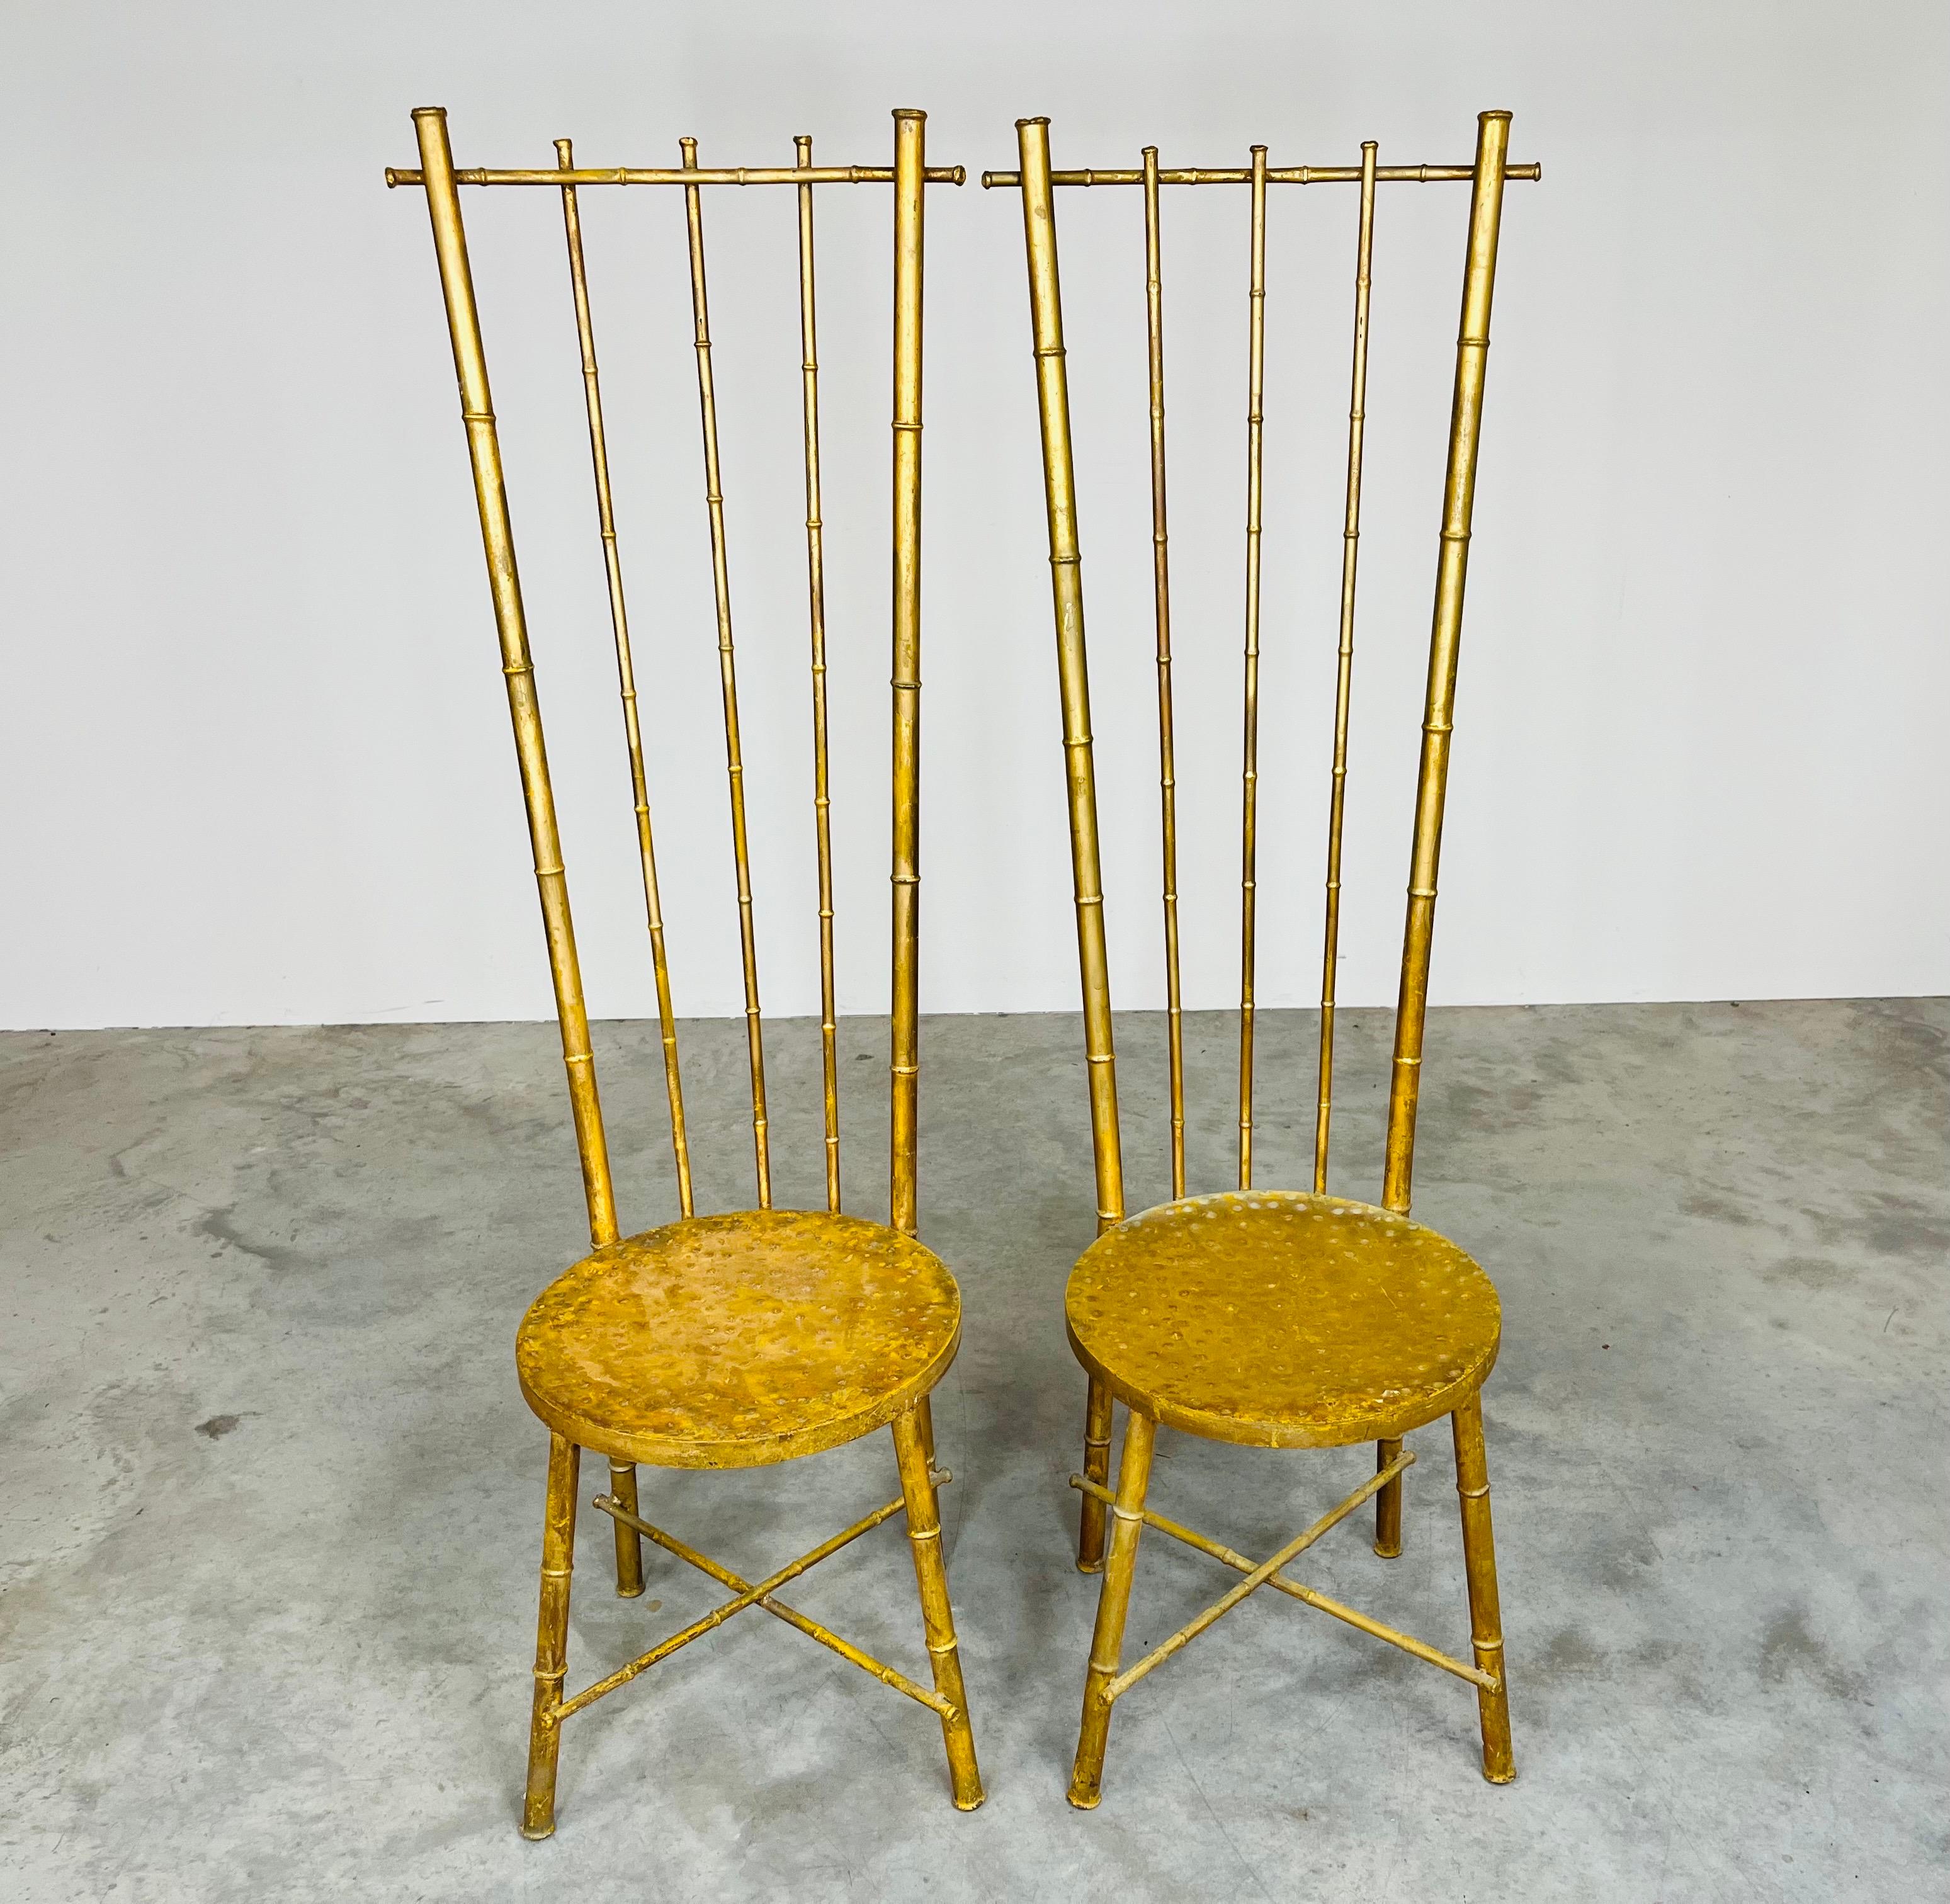 Vintage Pair Of Hollywood Regency Gold Gilt Metal Faux Bamboo High Back Chairs For Sale 5